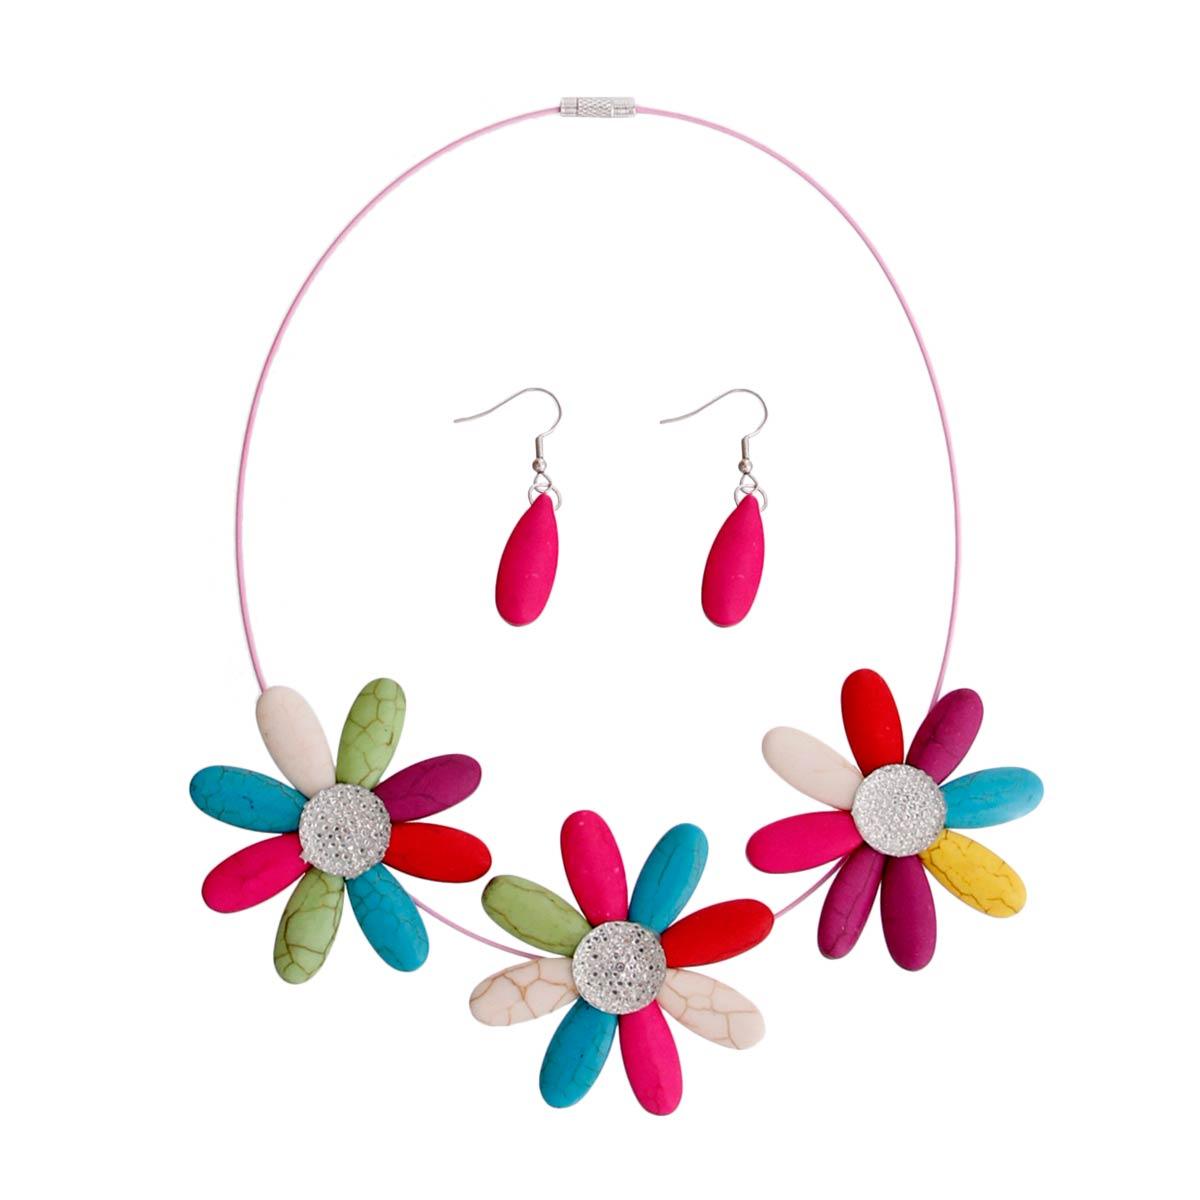 Buy Multicolor Daisy Necklace Set - Perfect Accessory for Summer